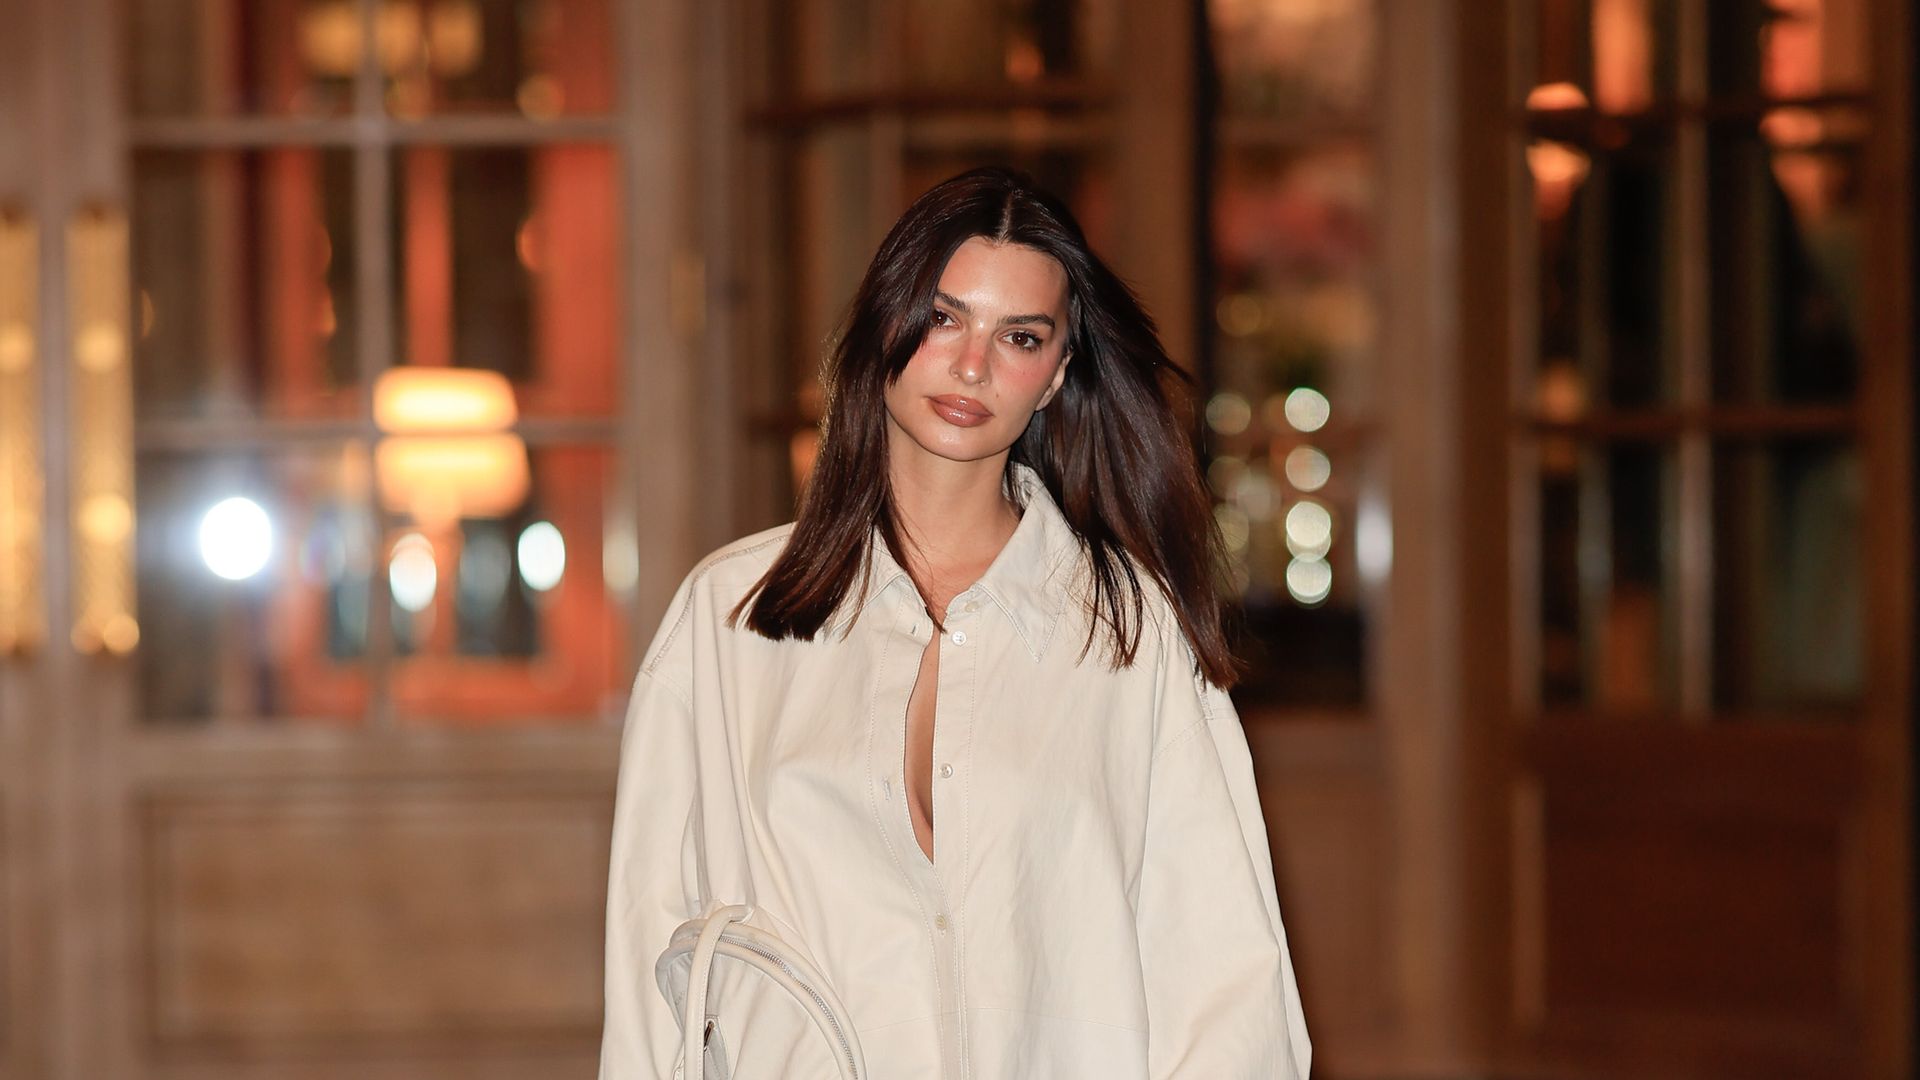 Emily Ratajkowski just debuted this season's most notable new trainer